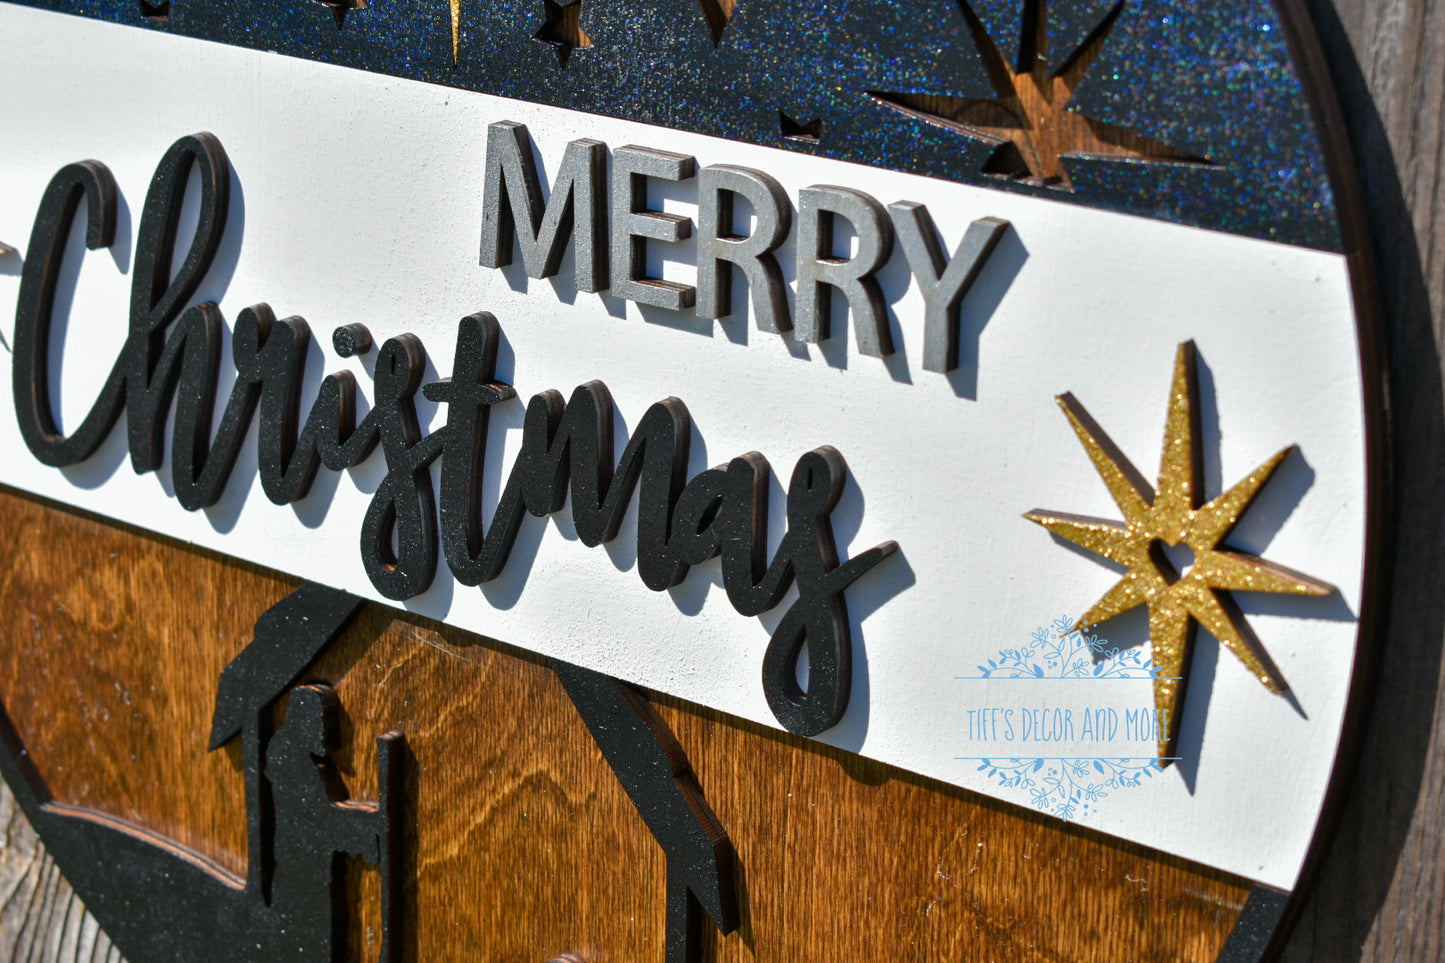 Merry Christmas with Nativity style scene door sign